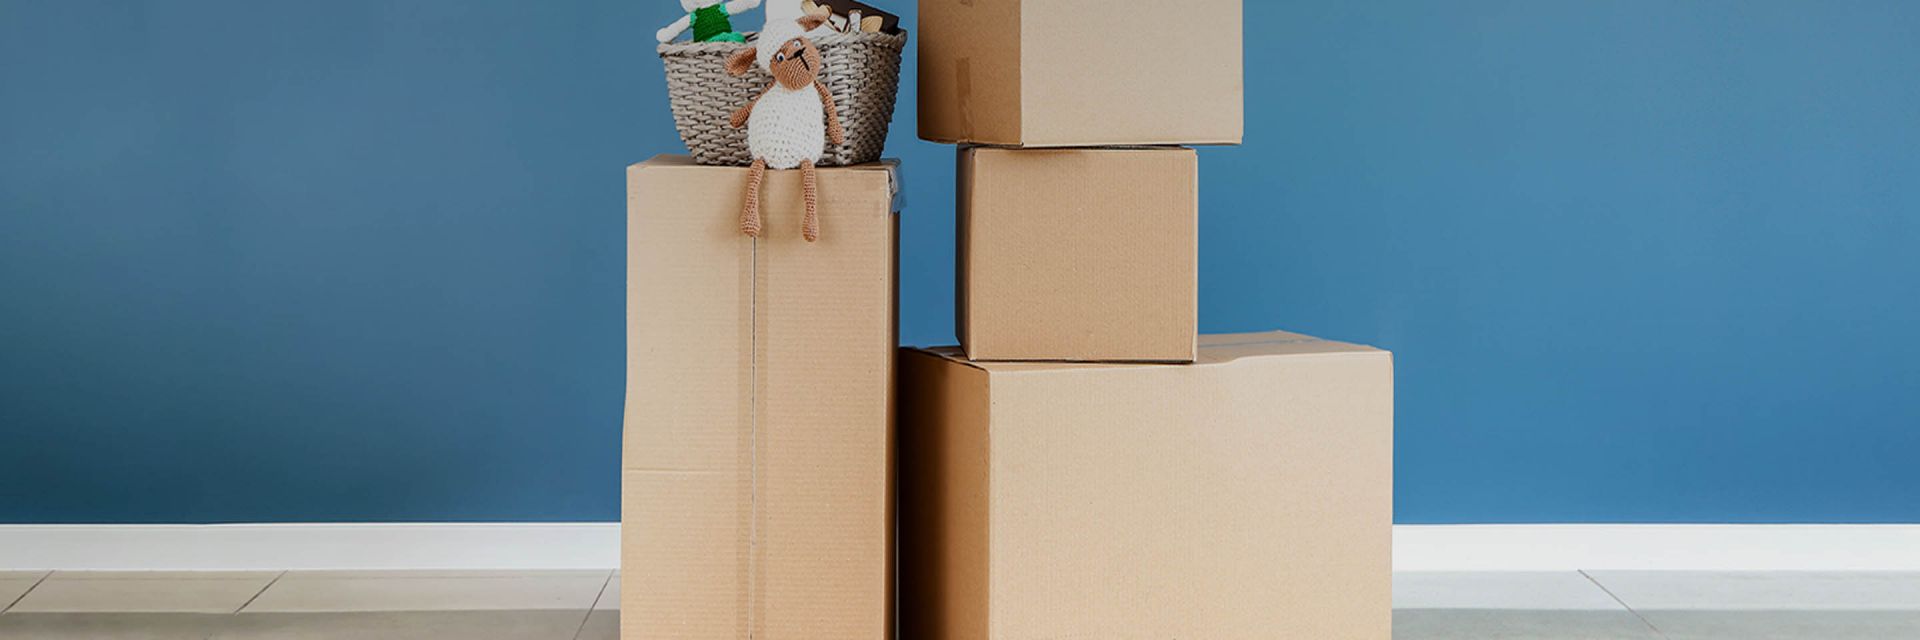 How Much Does It Cost To Move Average Cost Of Moving House